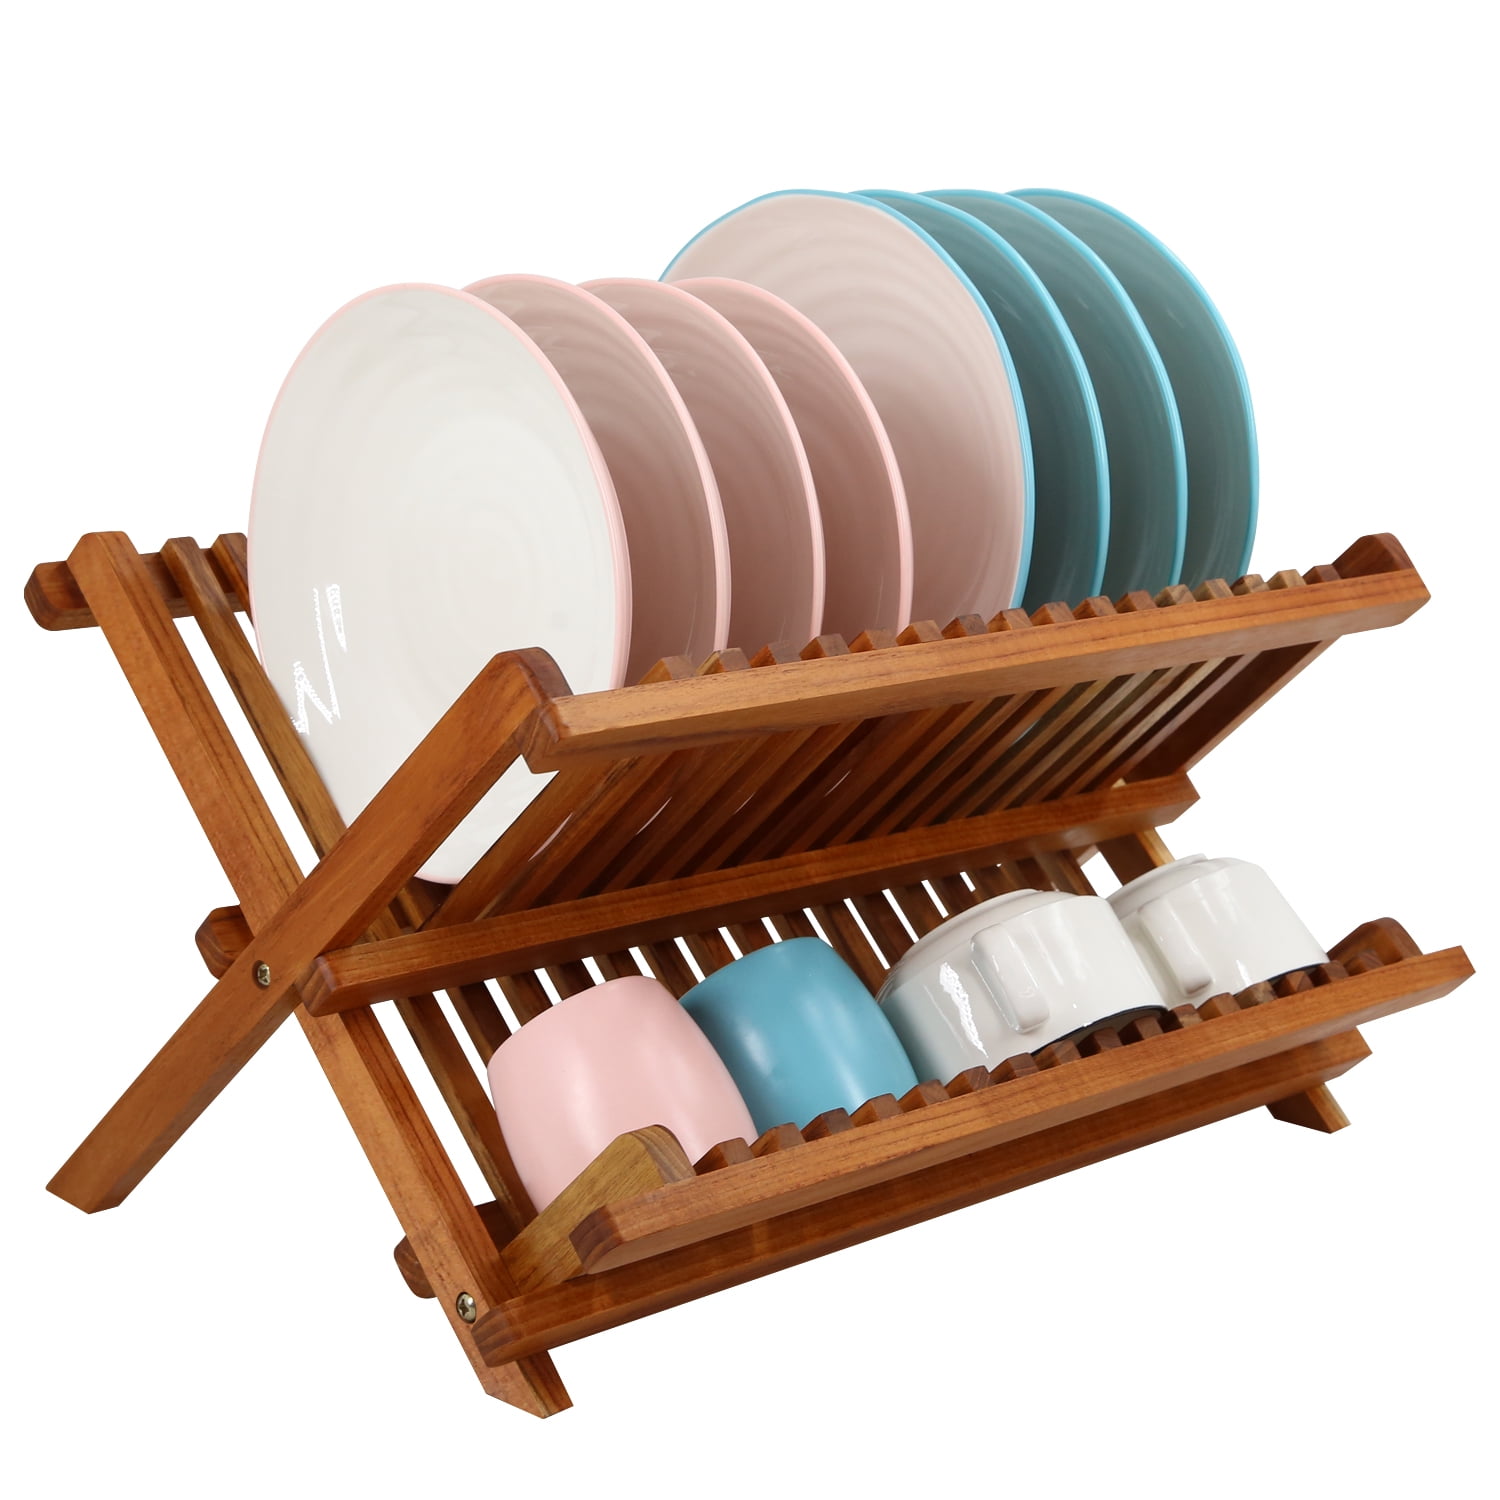 Thyme & Table Dish Rack with … curated on LTK